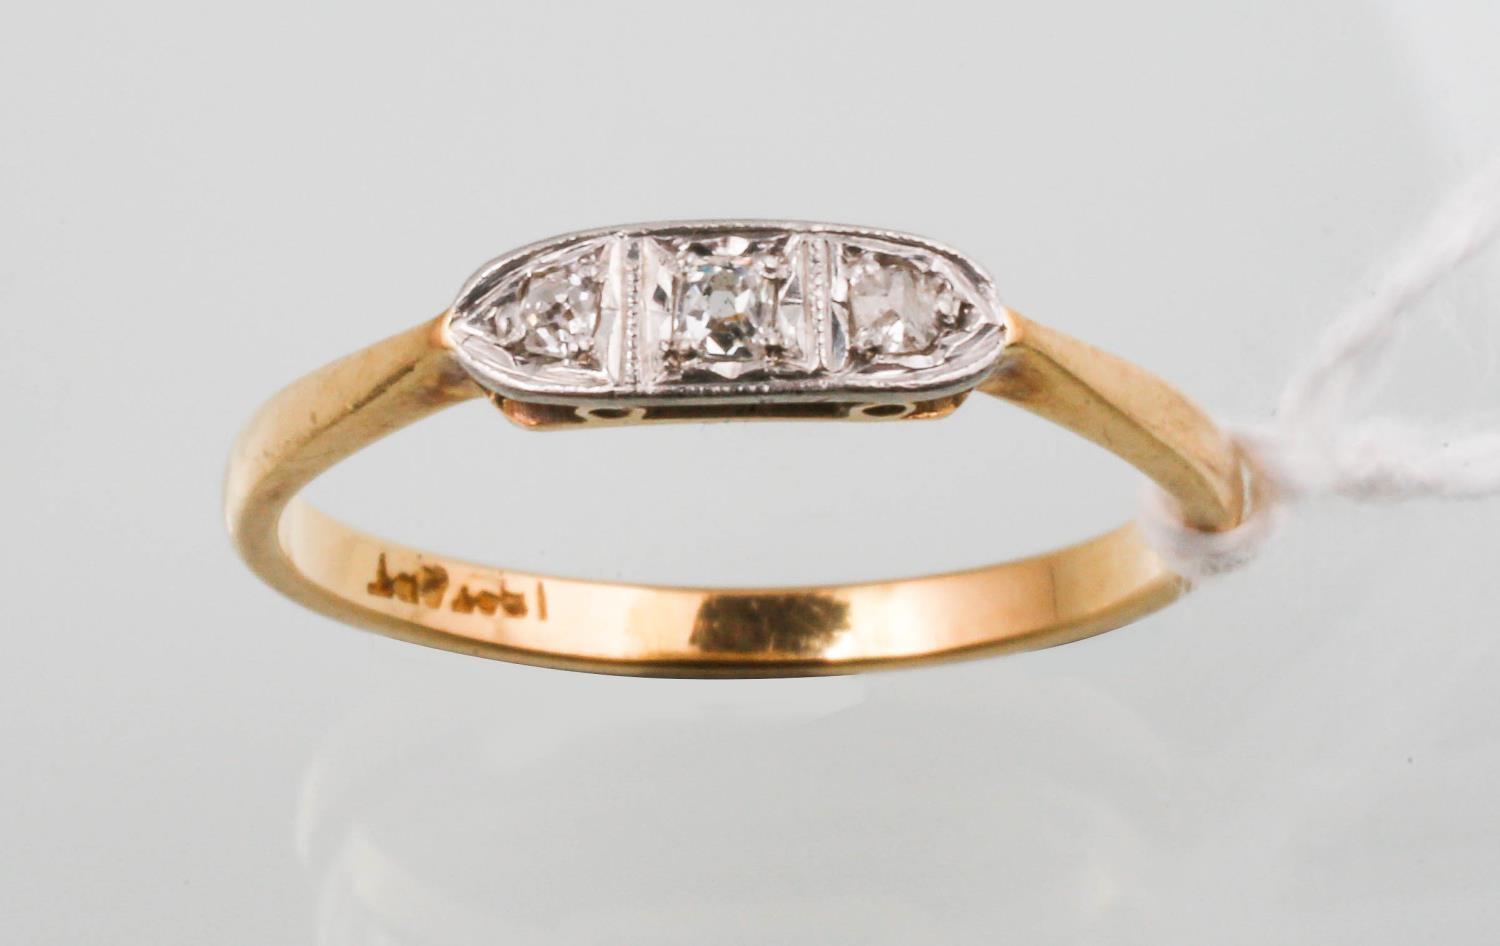 A DIAMOND THREE STONE RING WITH OLD CUT DIAMONDS, ILLUSION SET, GOLD HOOP MARKED 18CT PLAT, 2.4G,